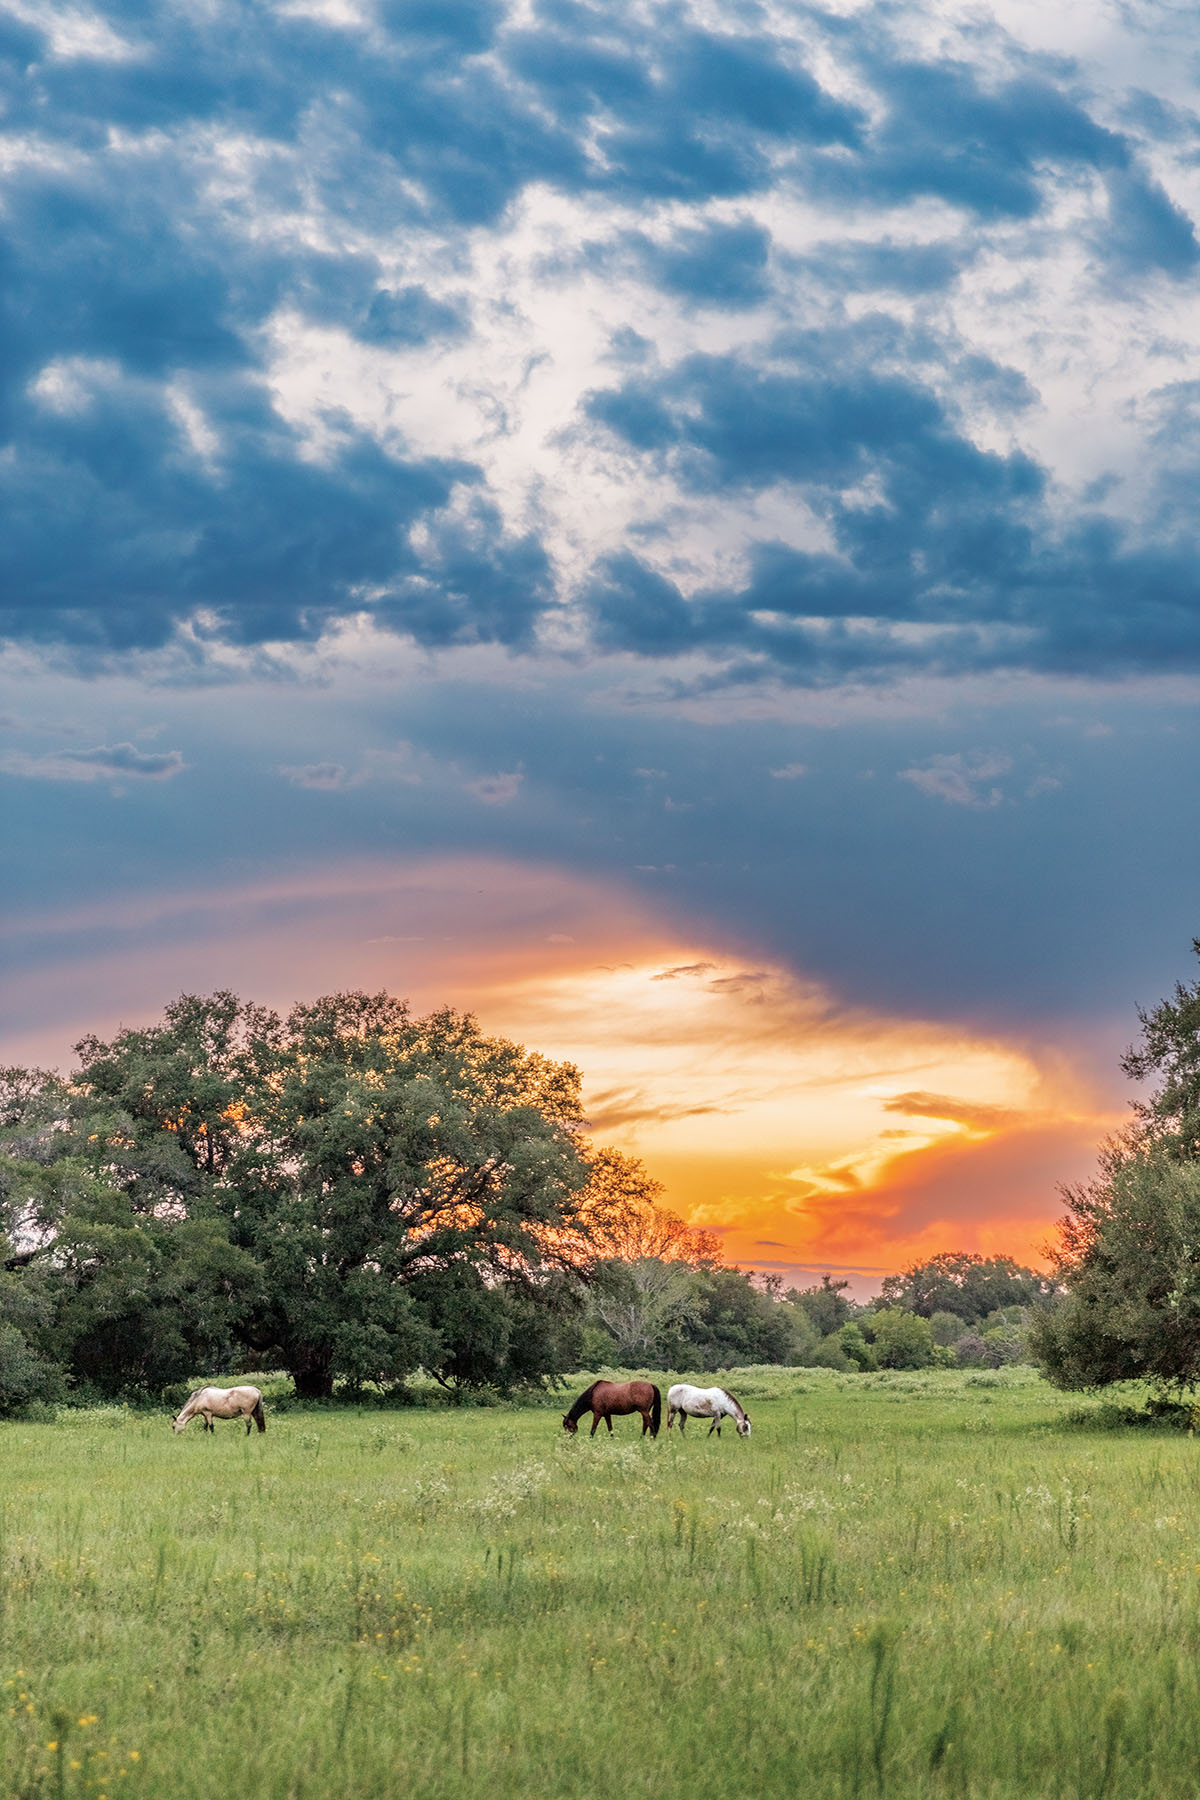 Three horses stand in a bright green pasture under a cloudy sunset